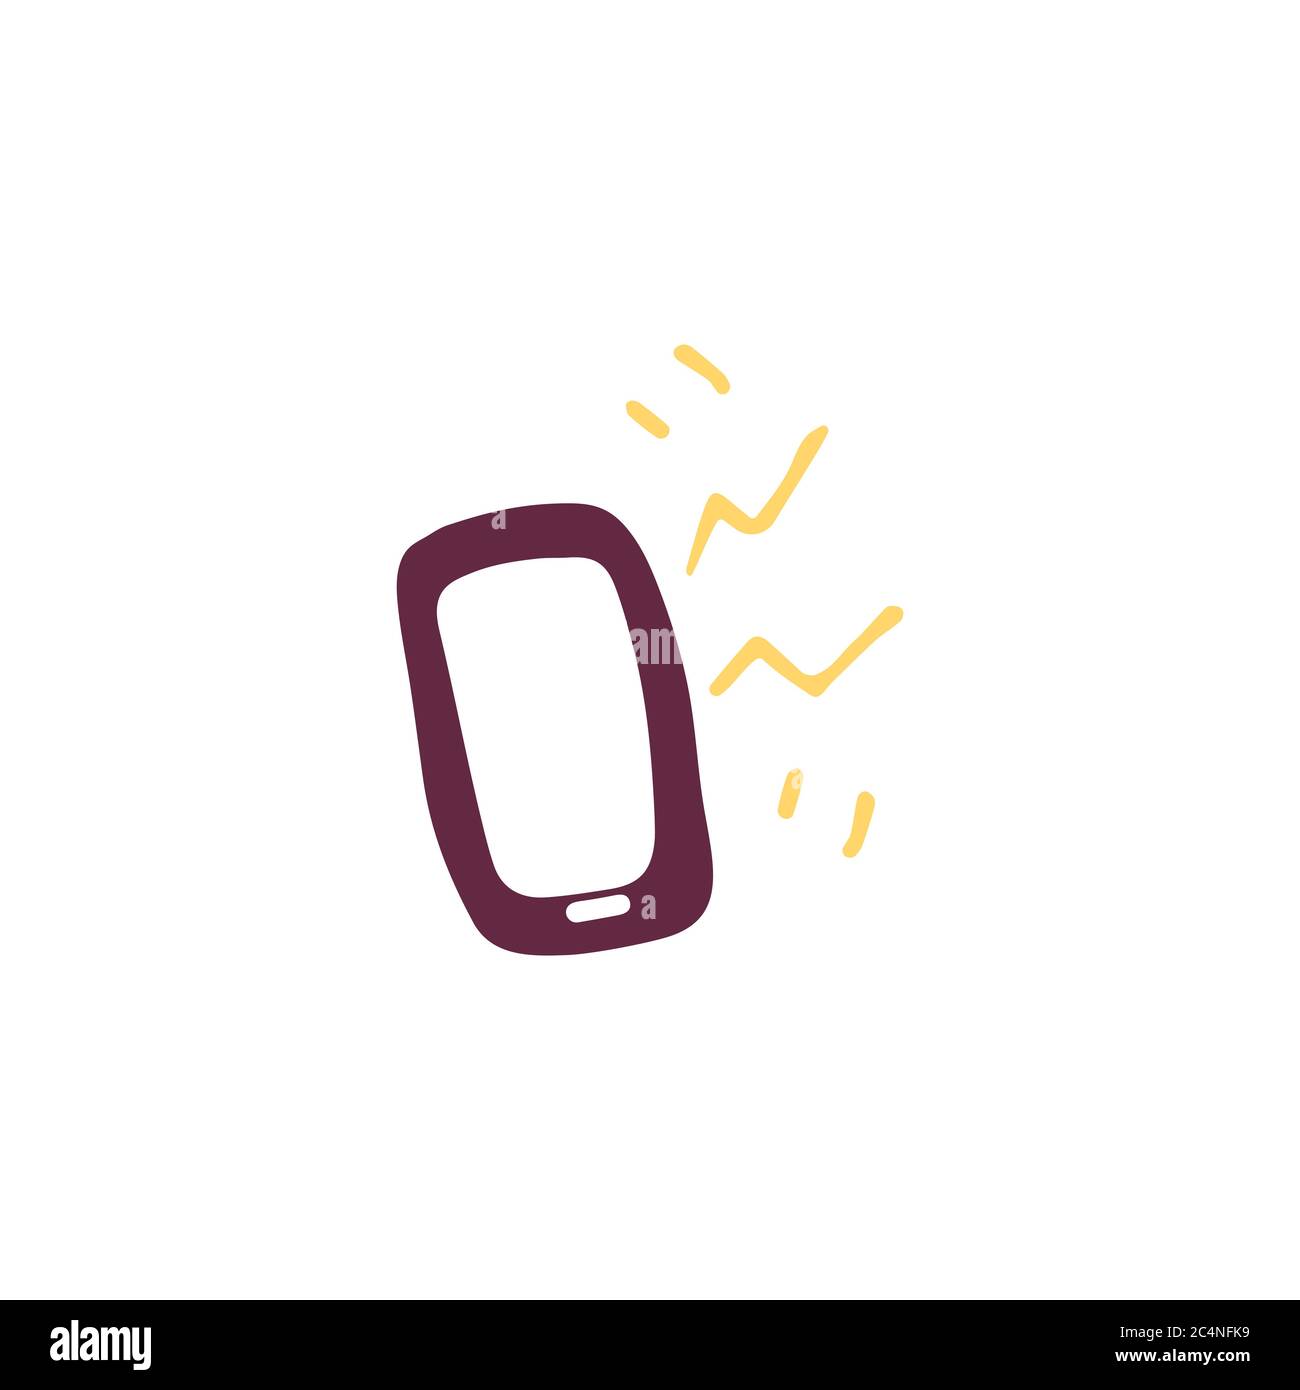 Ringing mobile phone. Vector sketch illustration - smartphone with touchscreen display. Stock Vector